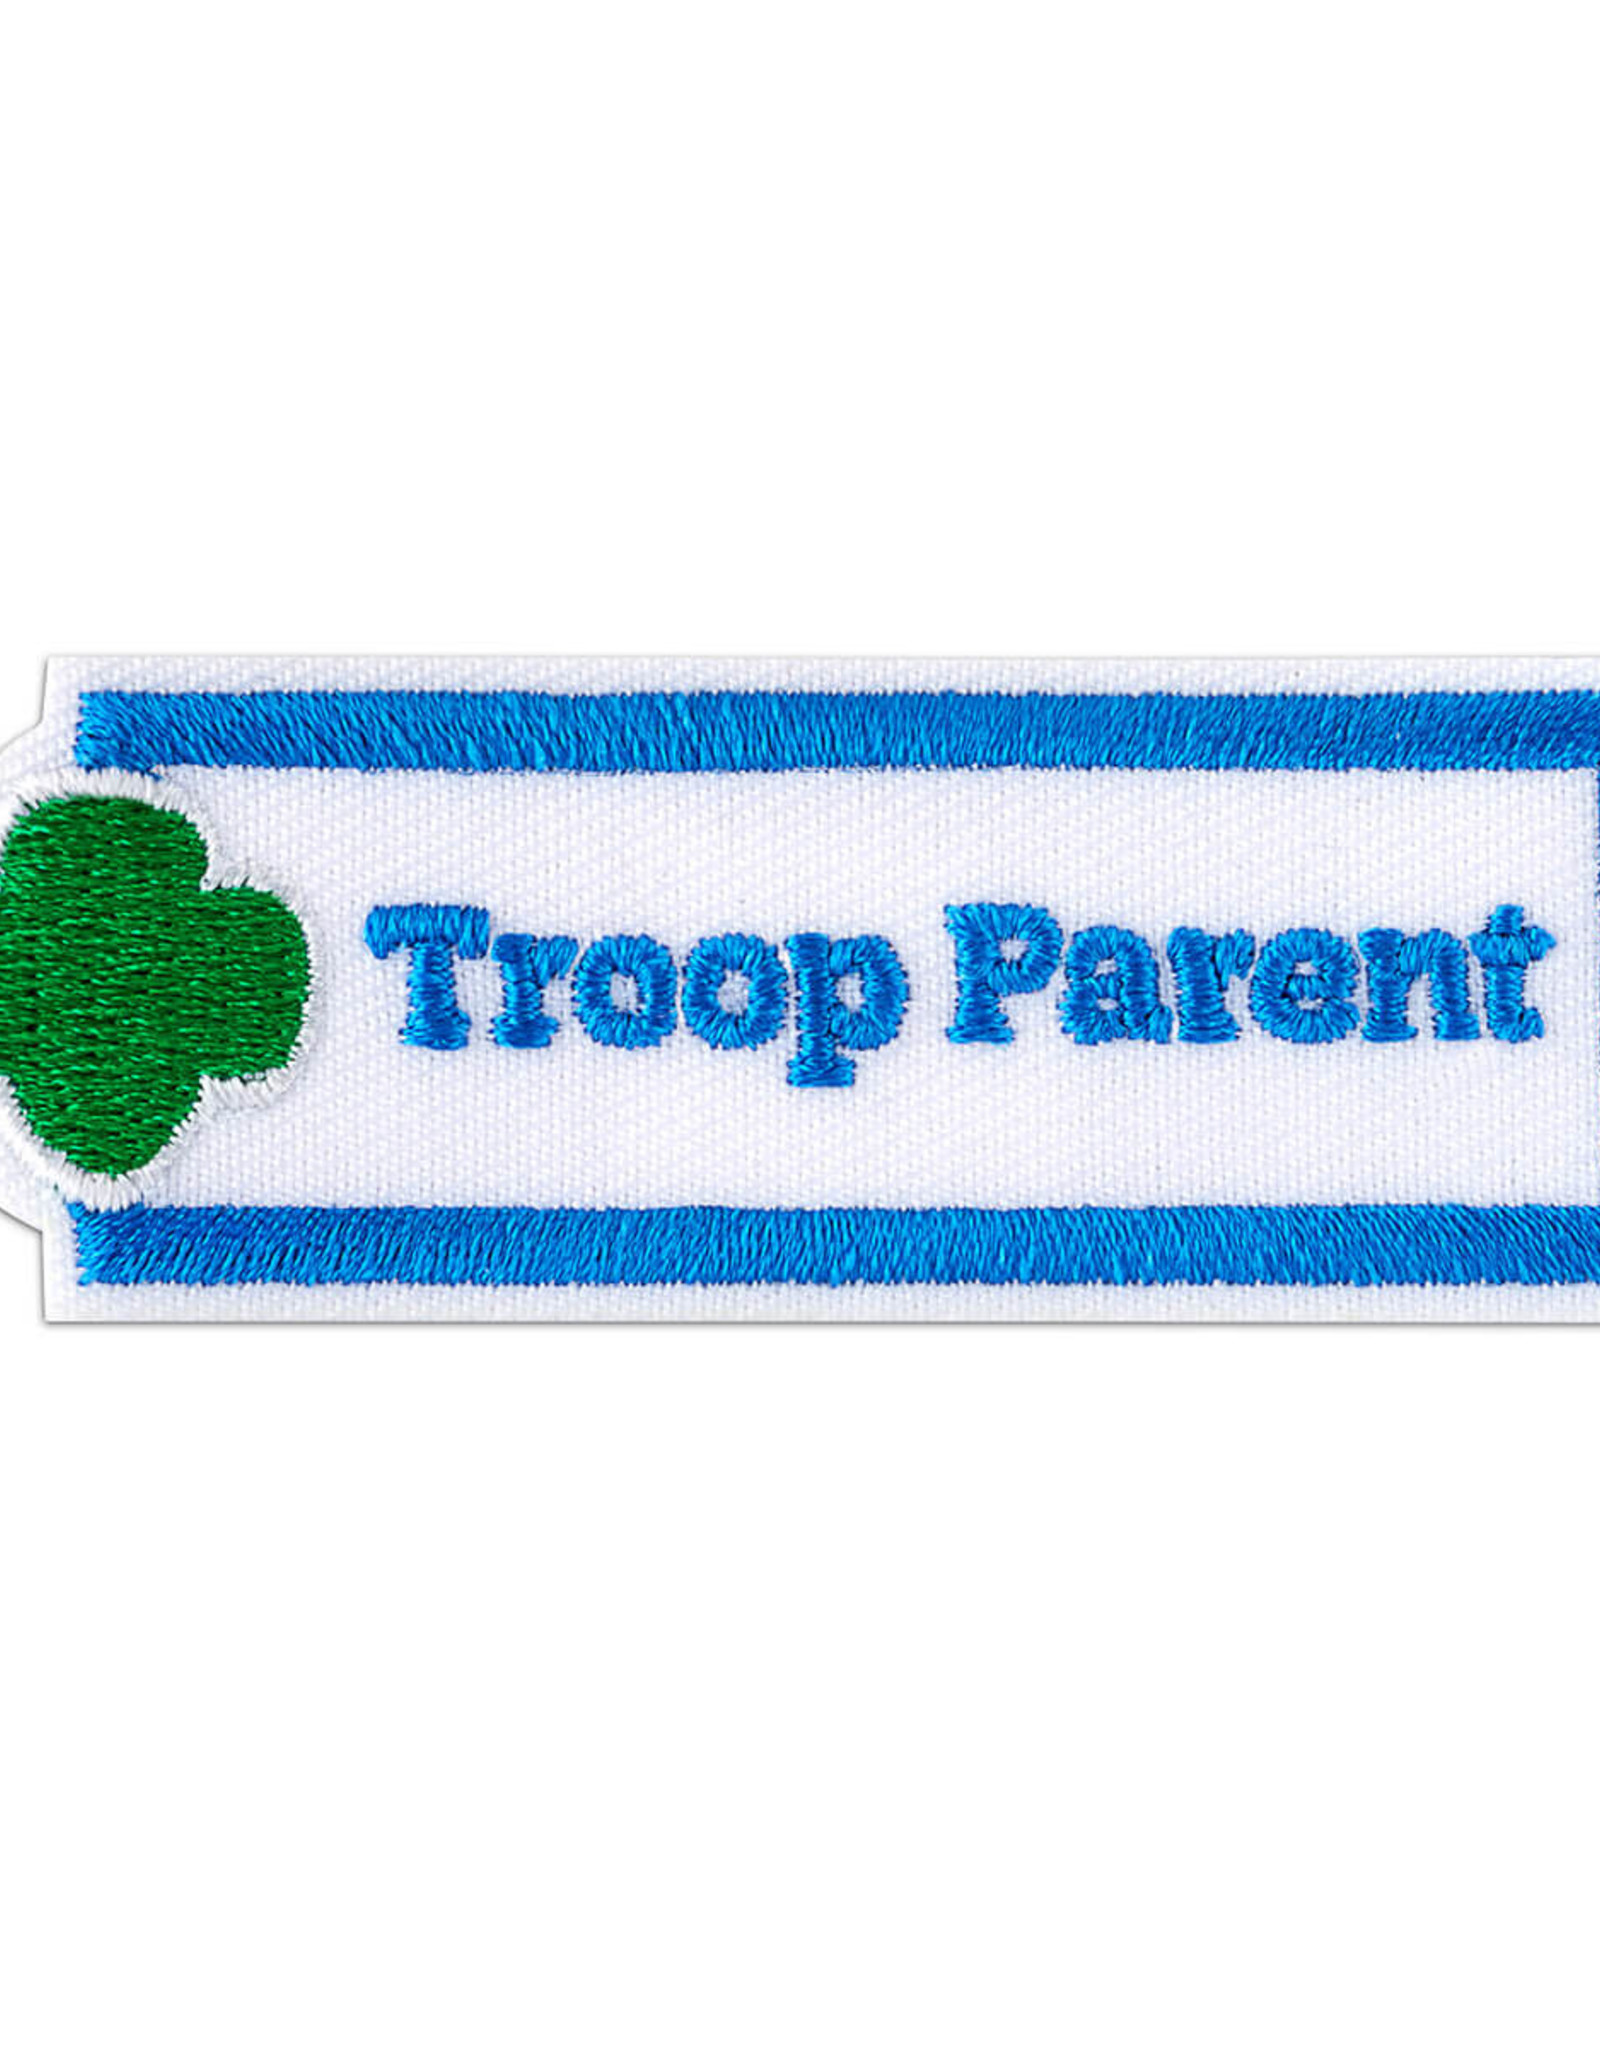 GIRL SCOUTS OF THE USA Troop Parent Adult Achievement Patch